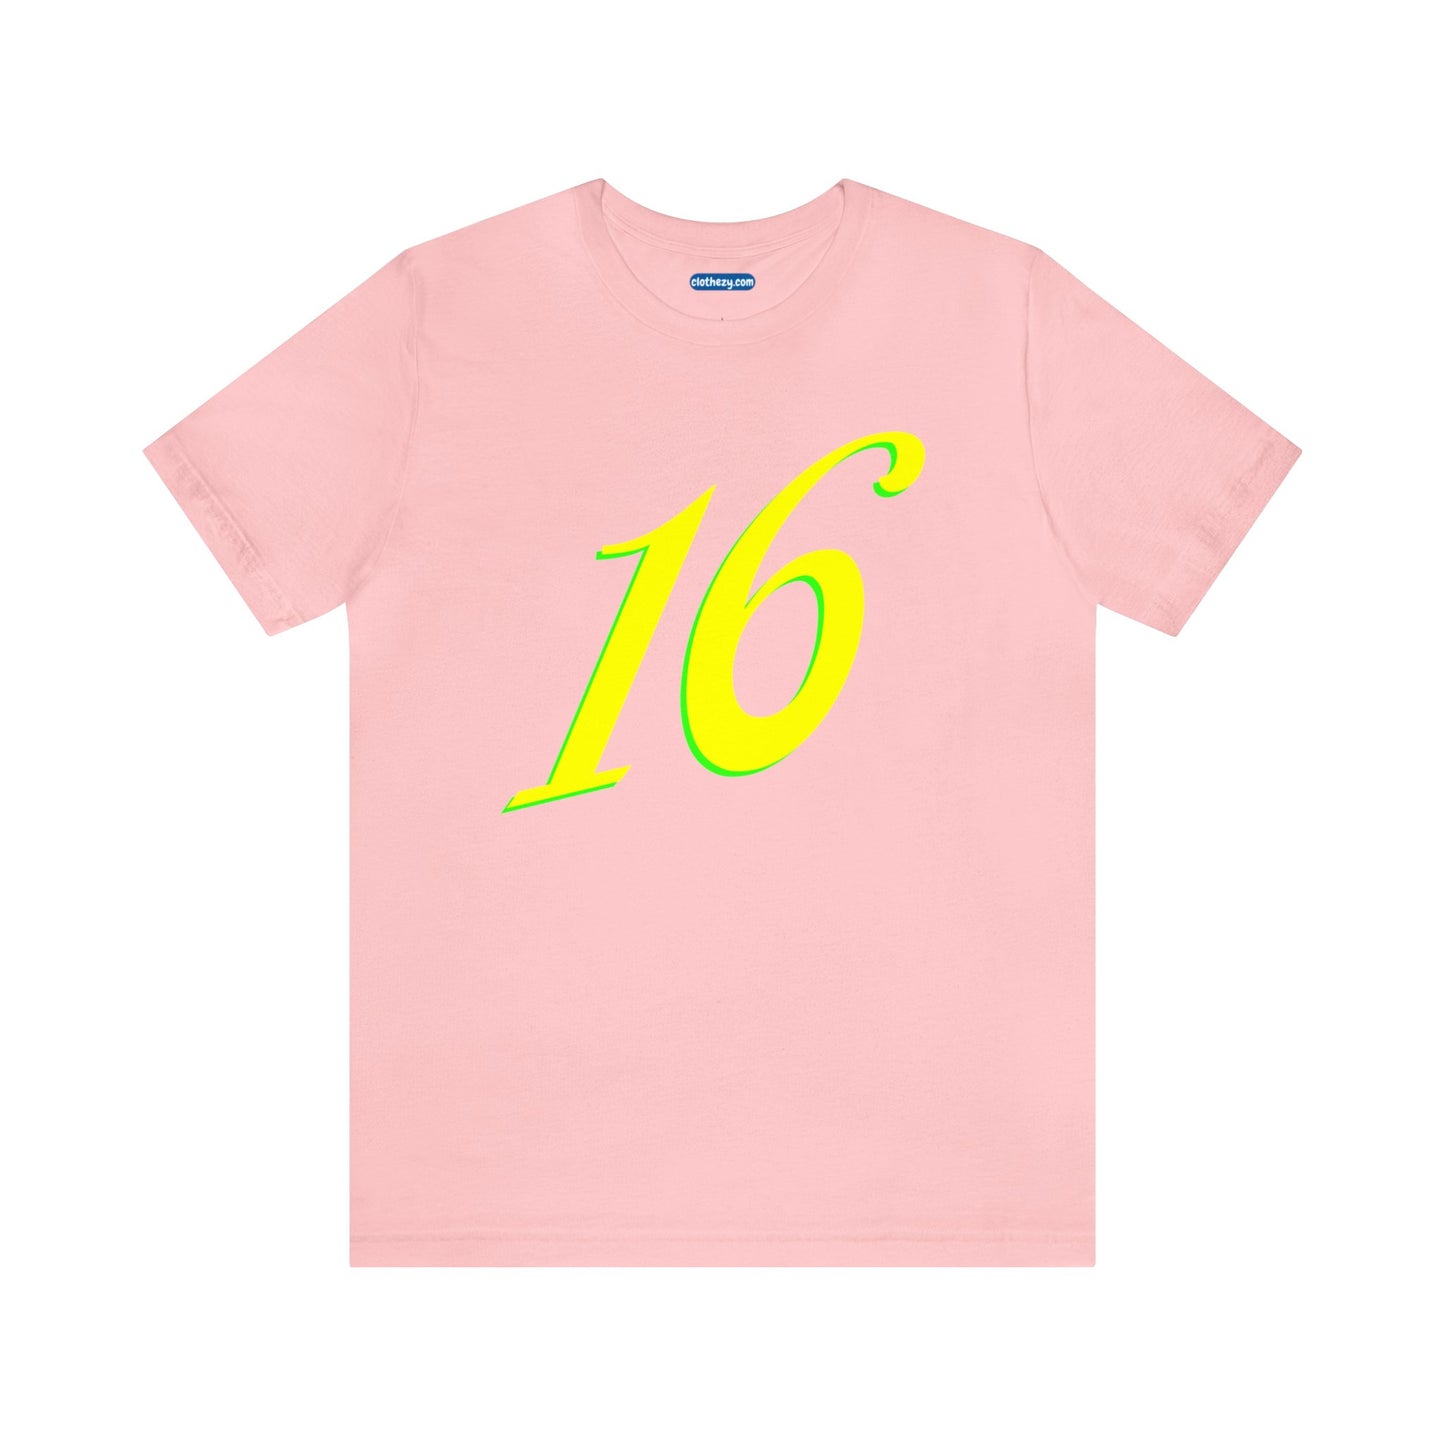 Number 16 Design - Soft Cotton Tee for birthdays and celebrations, Gift for friends and family, Multiple Options by clothezy.com in Pink Size Small - Buy Now